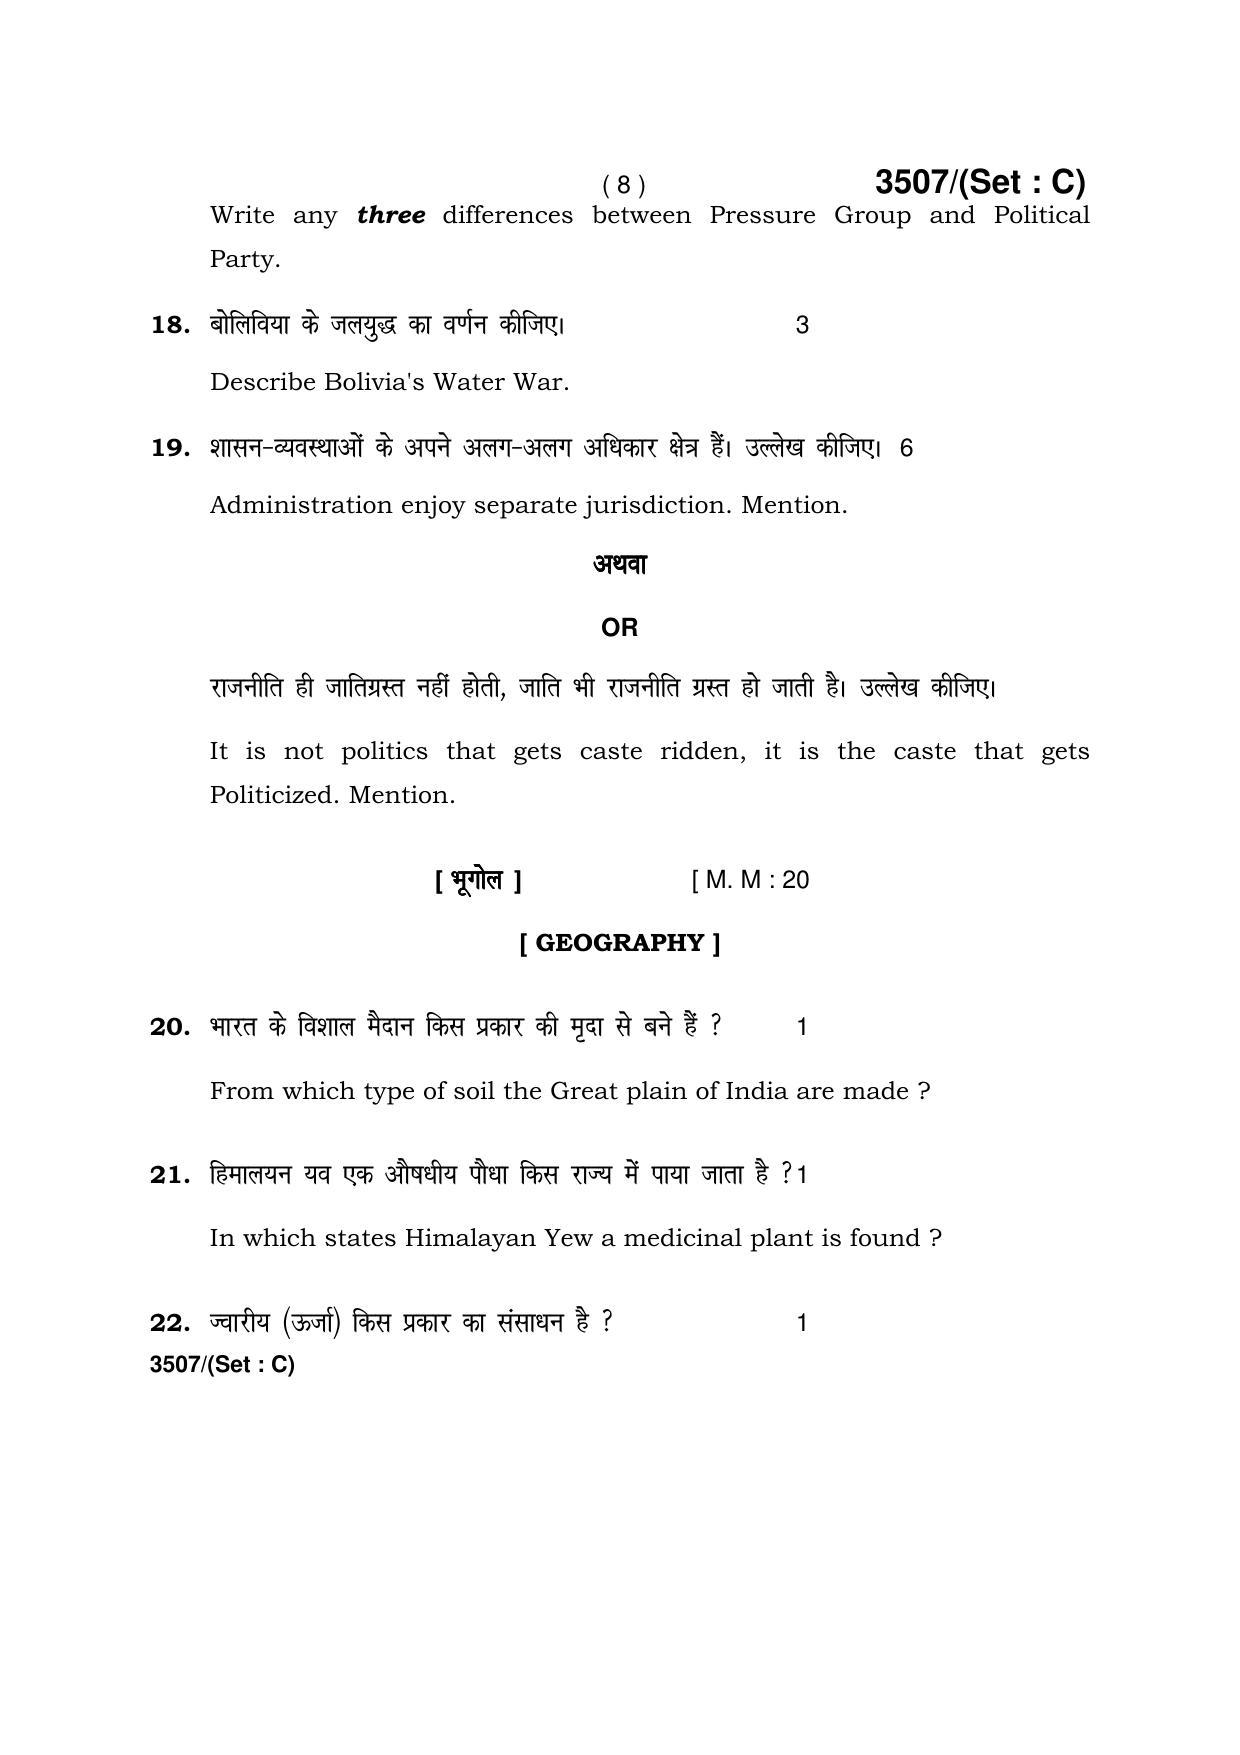  Haryana Board HBSE Class 10 Social Science -C 2018 Question Paper - Page 8